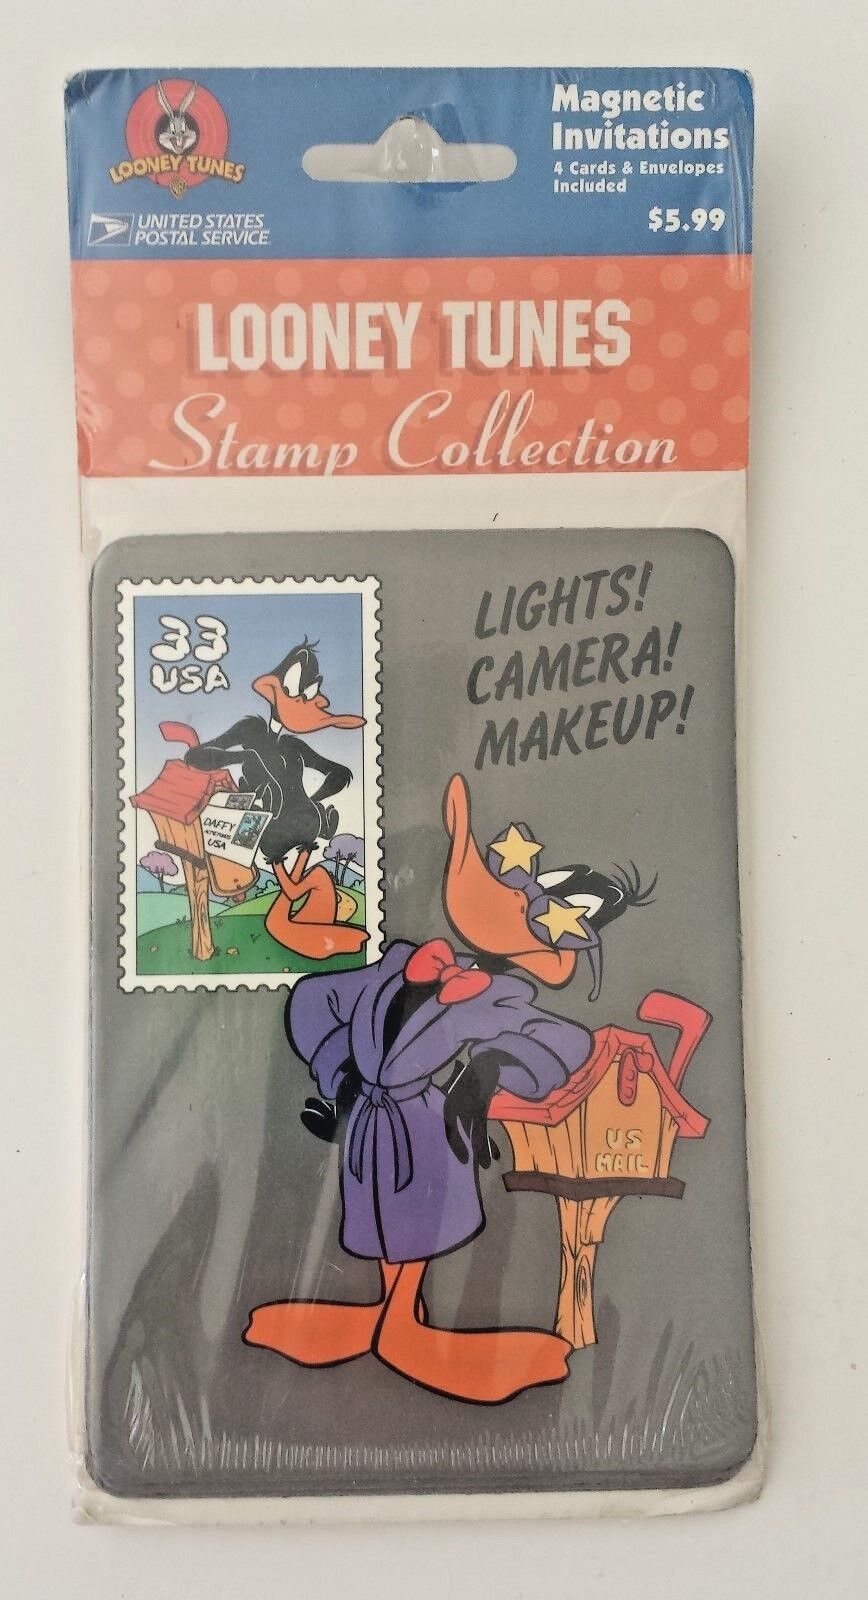 Daffy Duck LOONEY TUNES Stamp Collection Magnetic Invitations USPS Vtg 1999 NEW